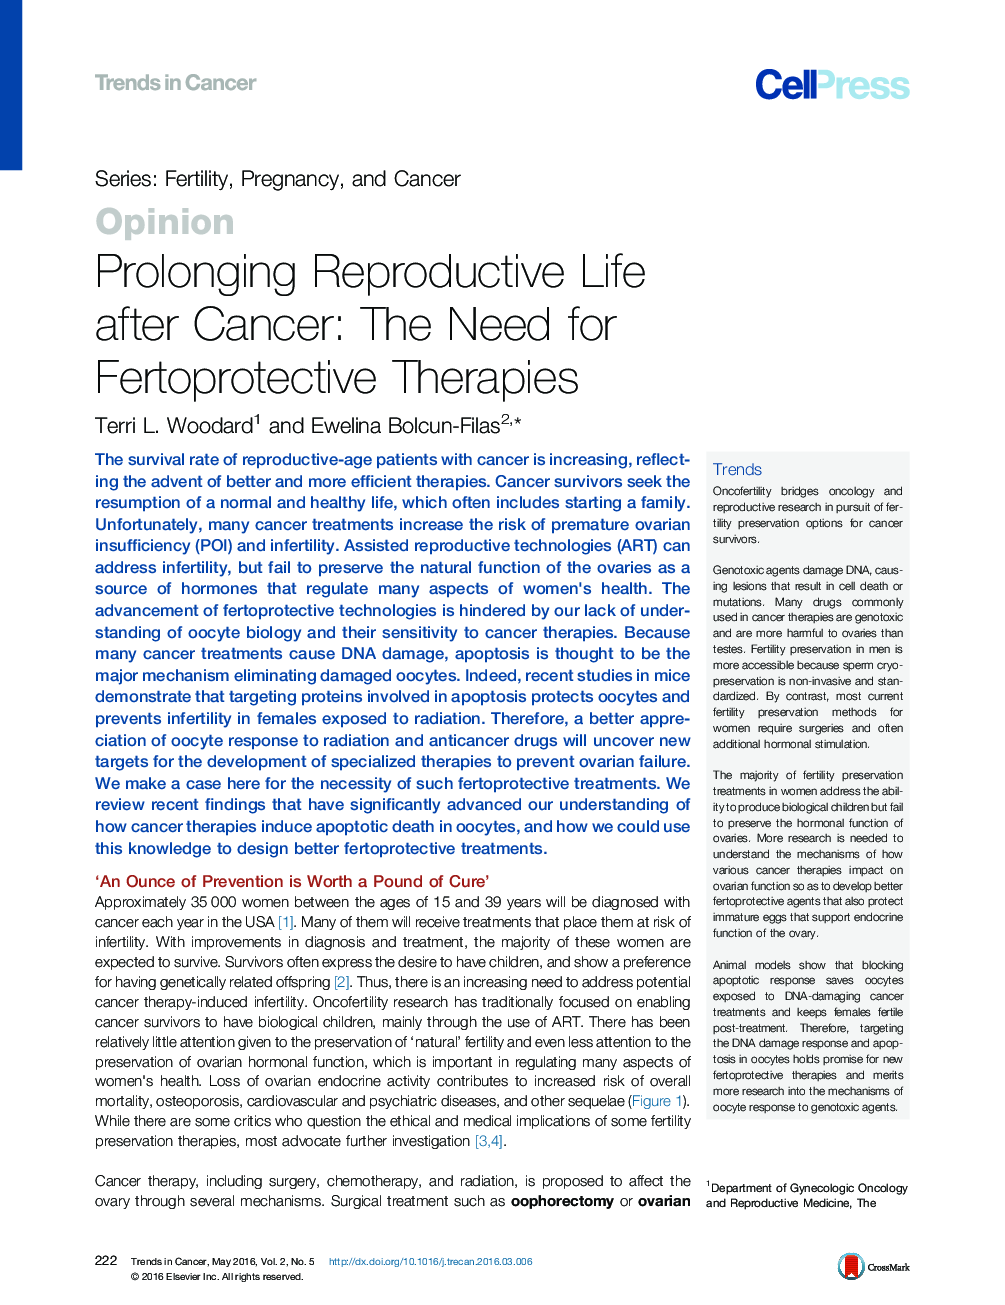 Prolonging Reproductive Life after Cancer: The Need for Fertoprotective Therapies